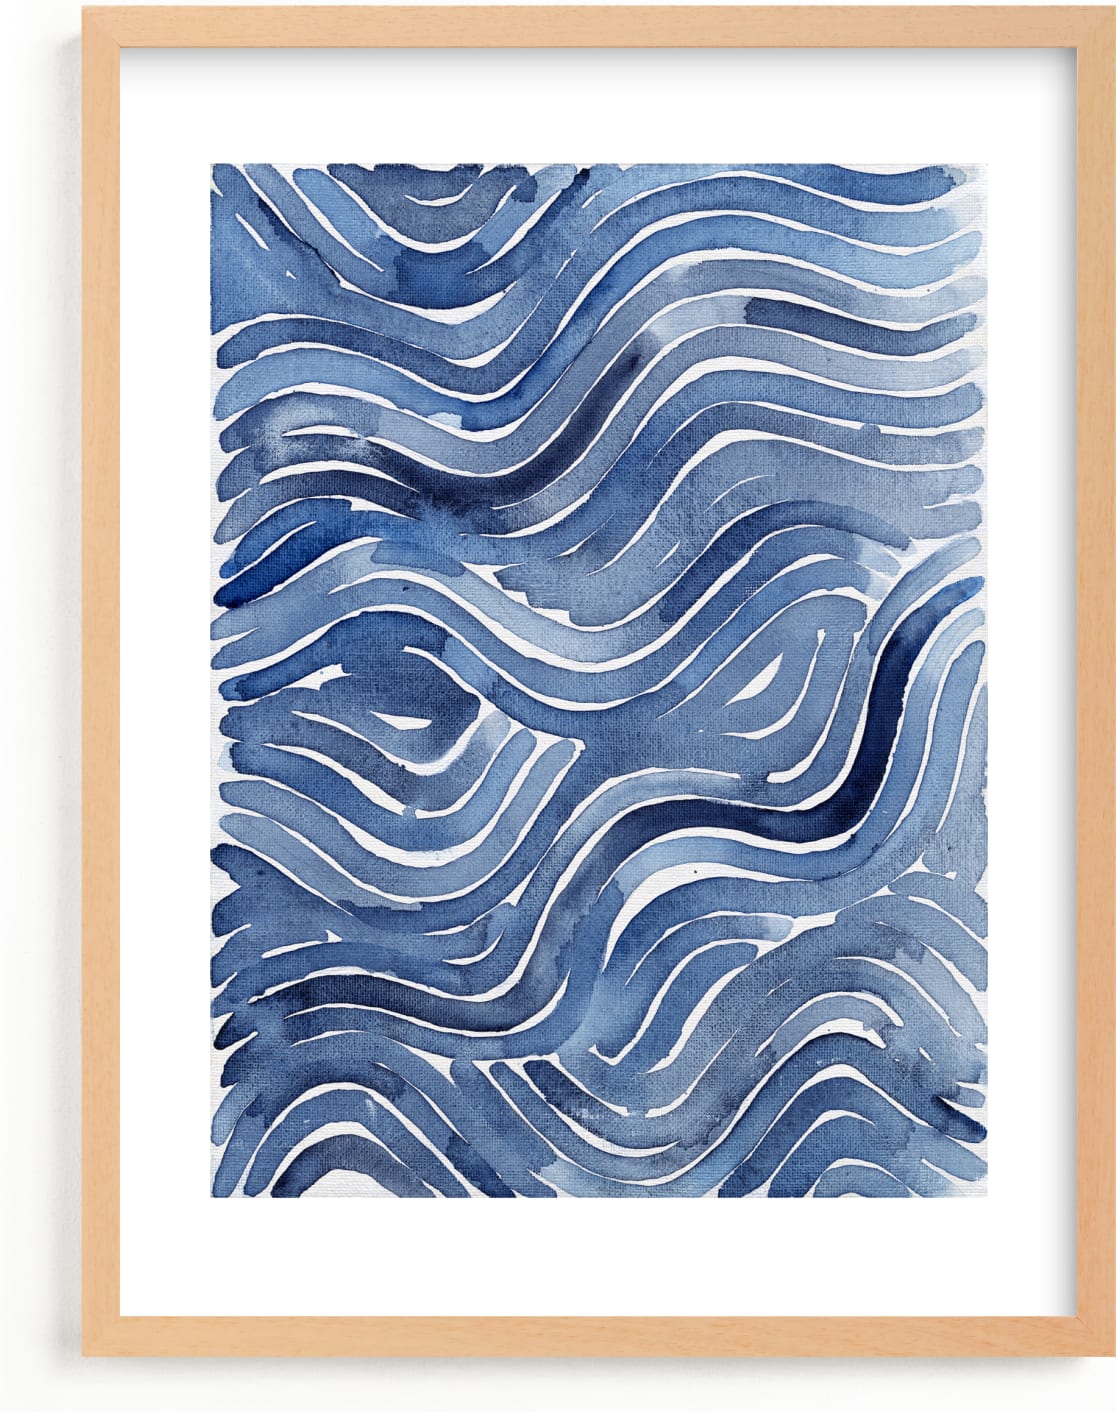 This is a blue kids wall art by Kristine Sarley called Playful Tide.